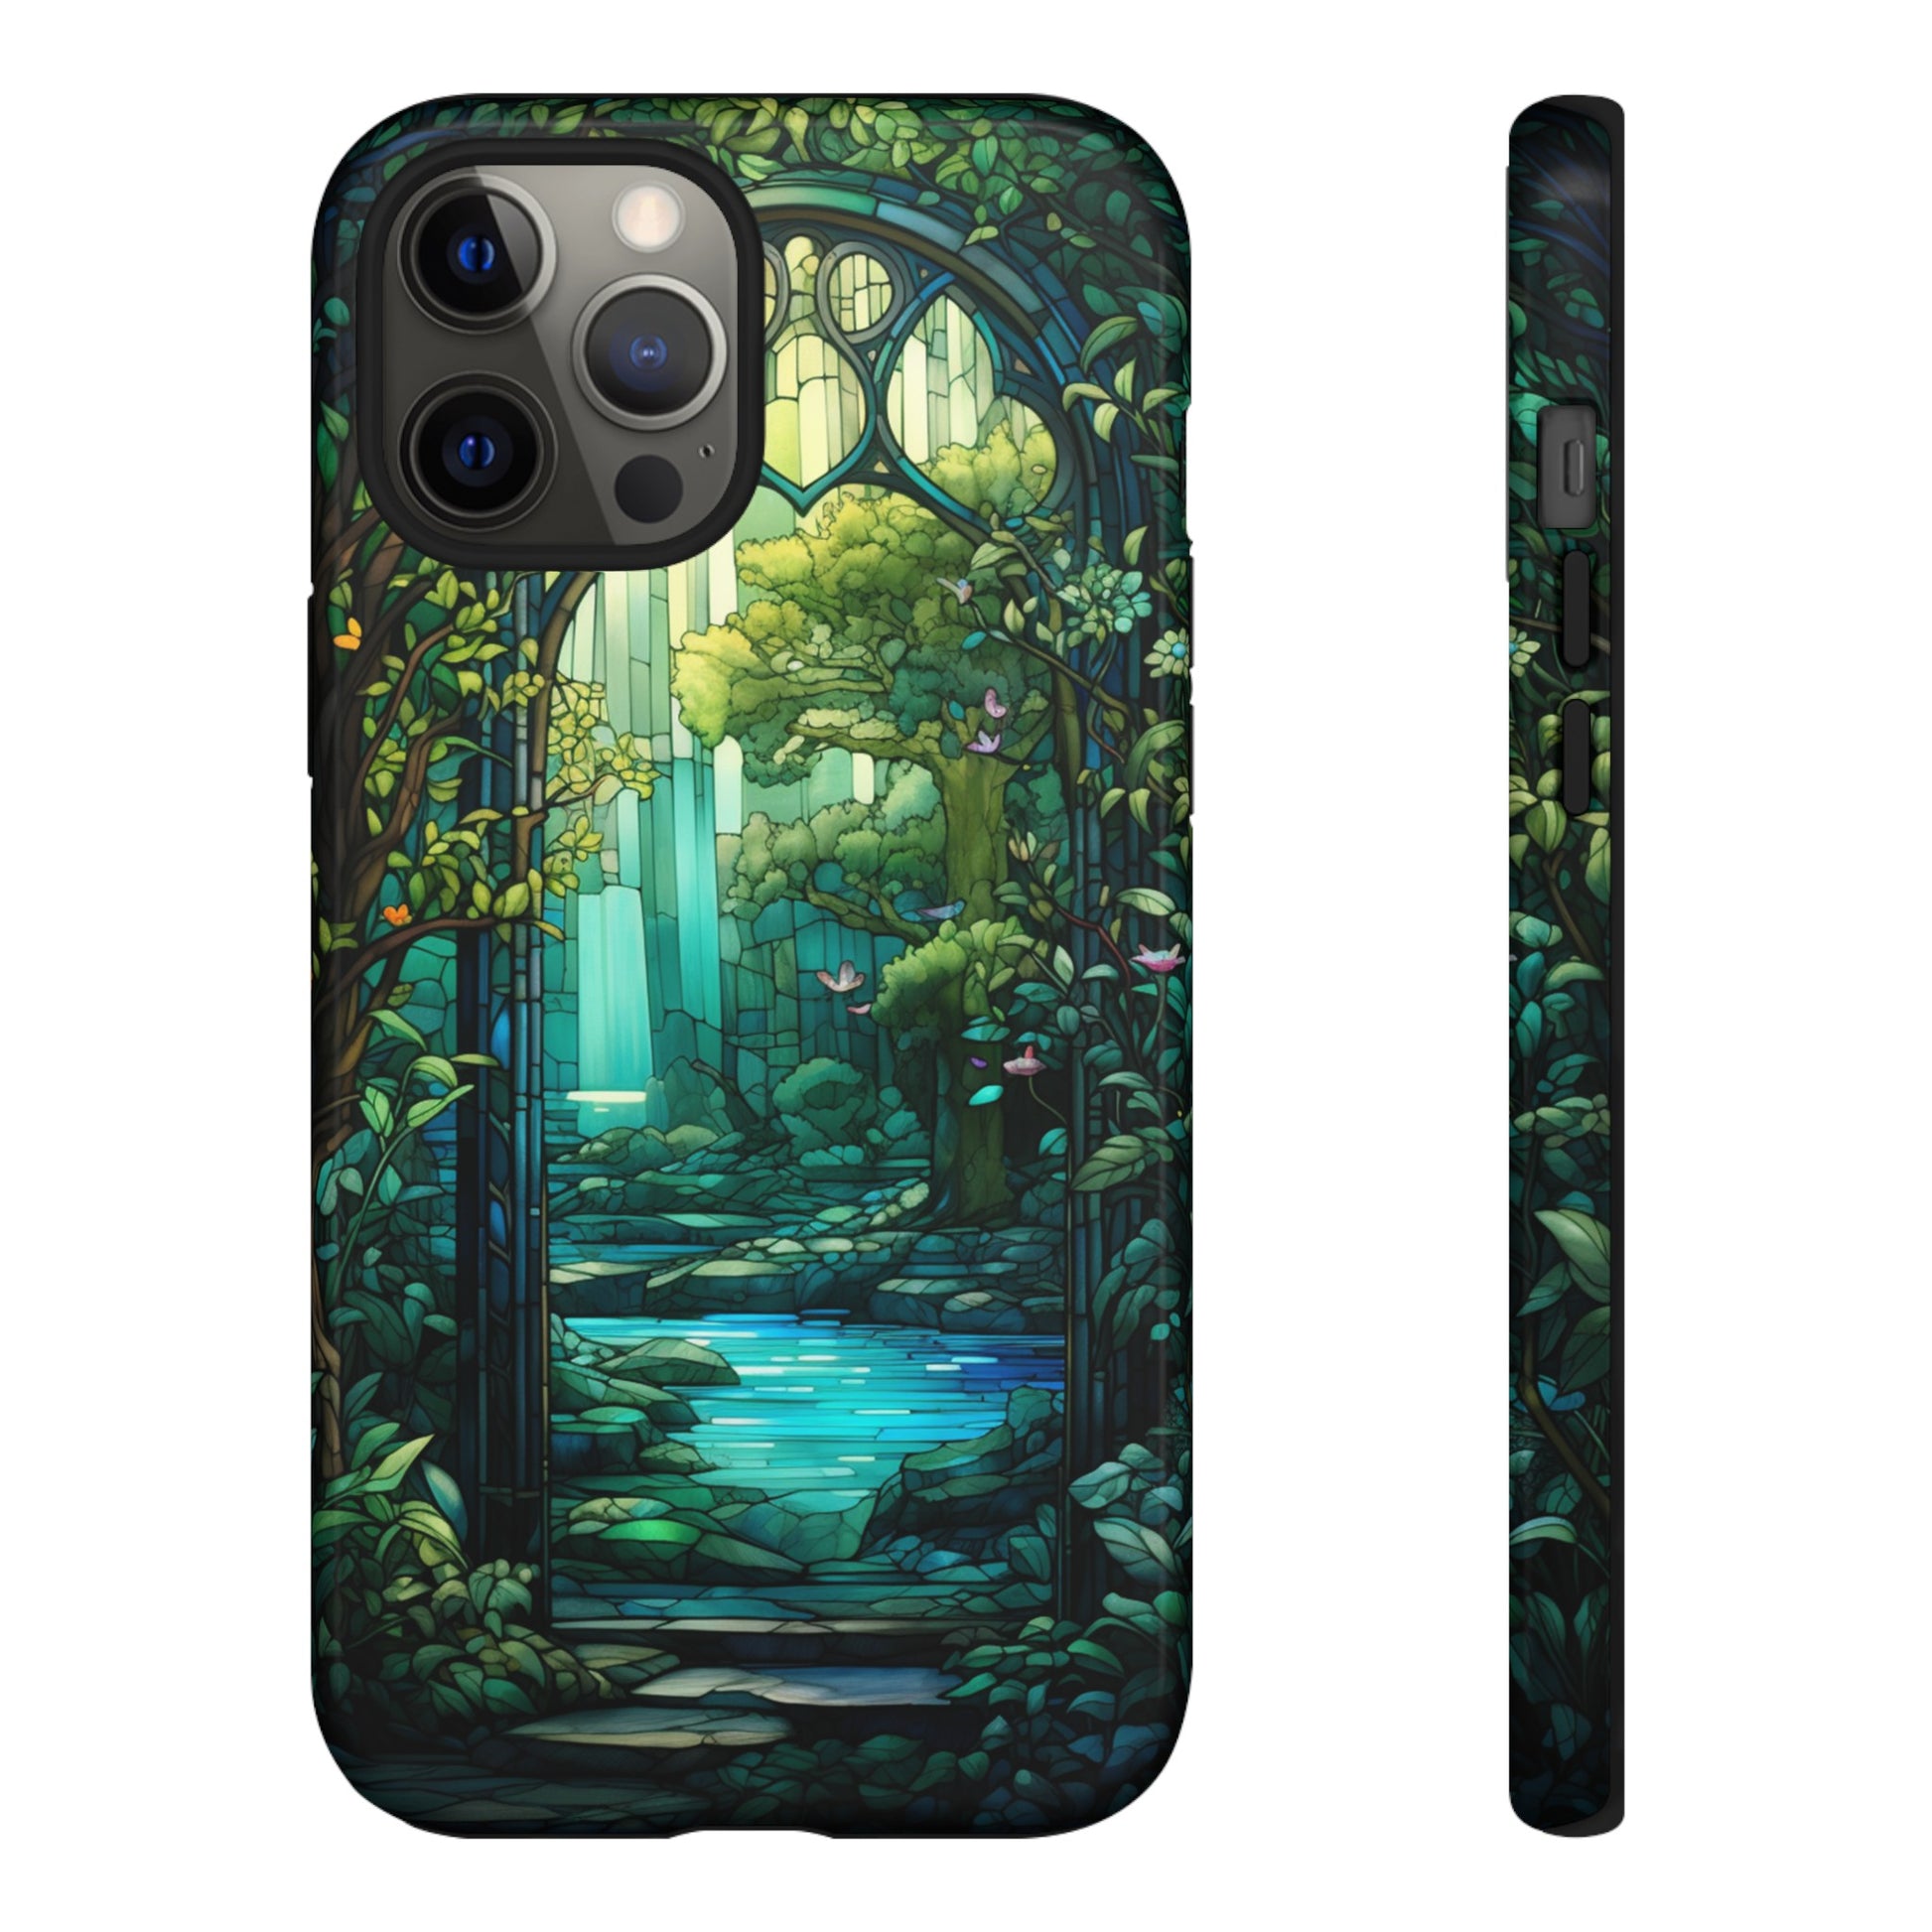 Decorative stained glass cover for iPhone 12